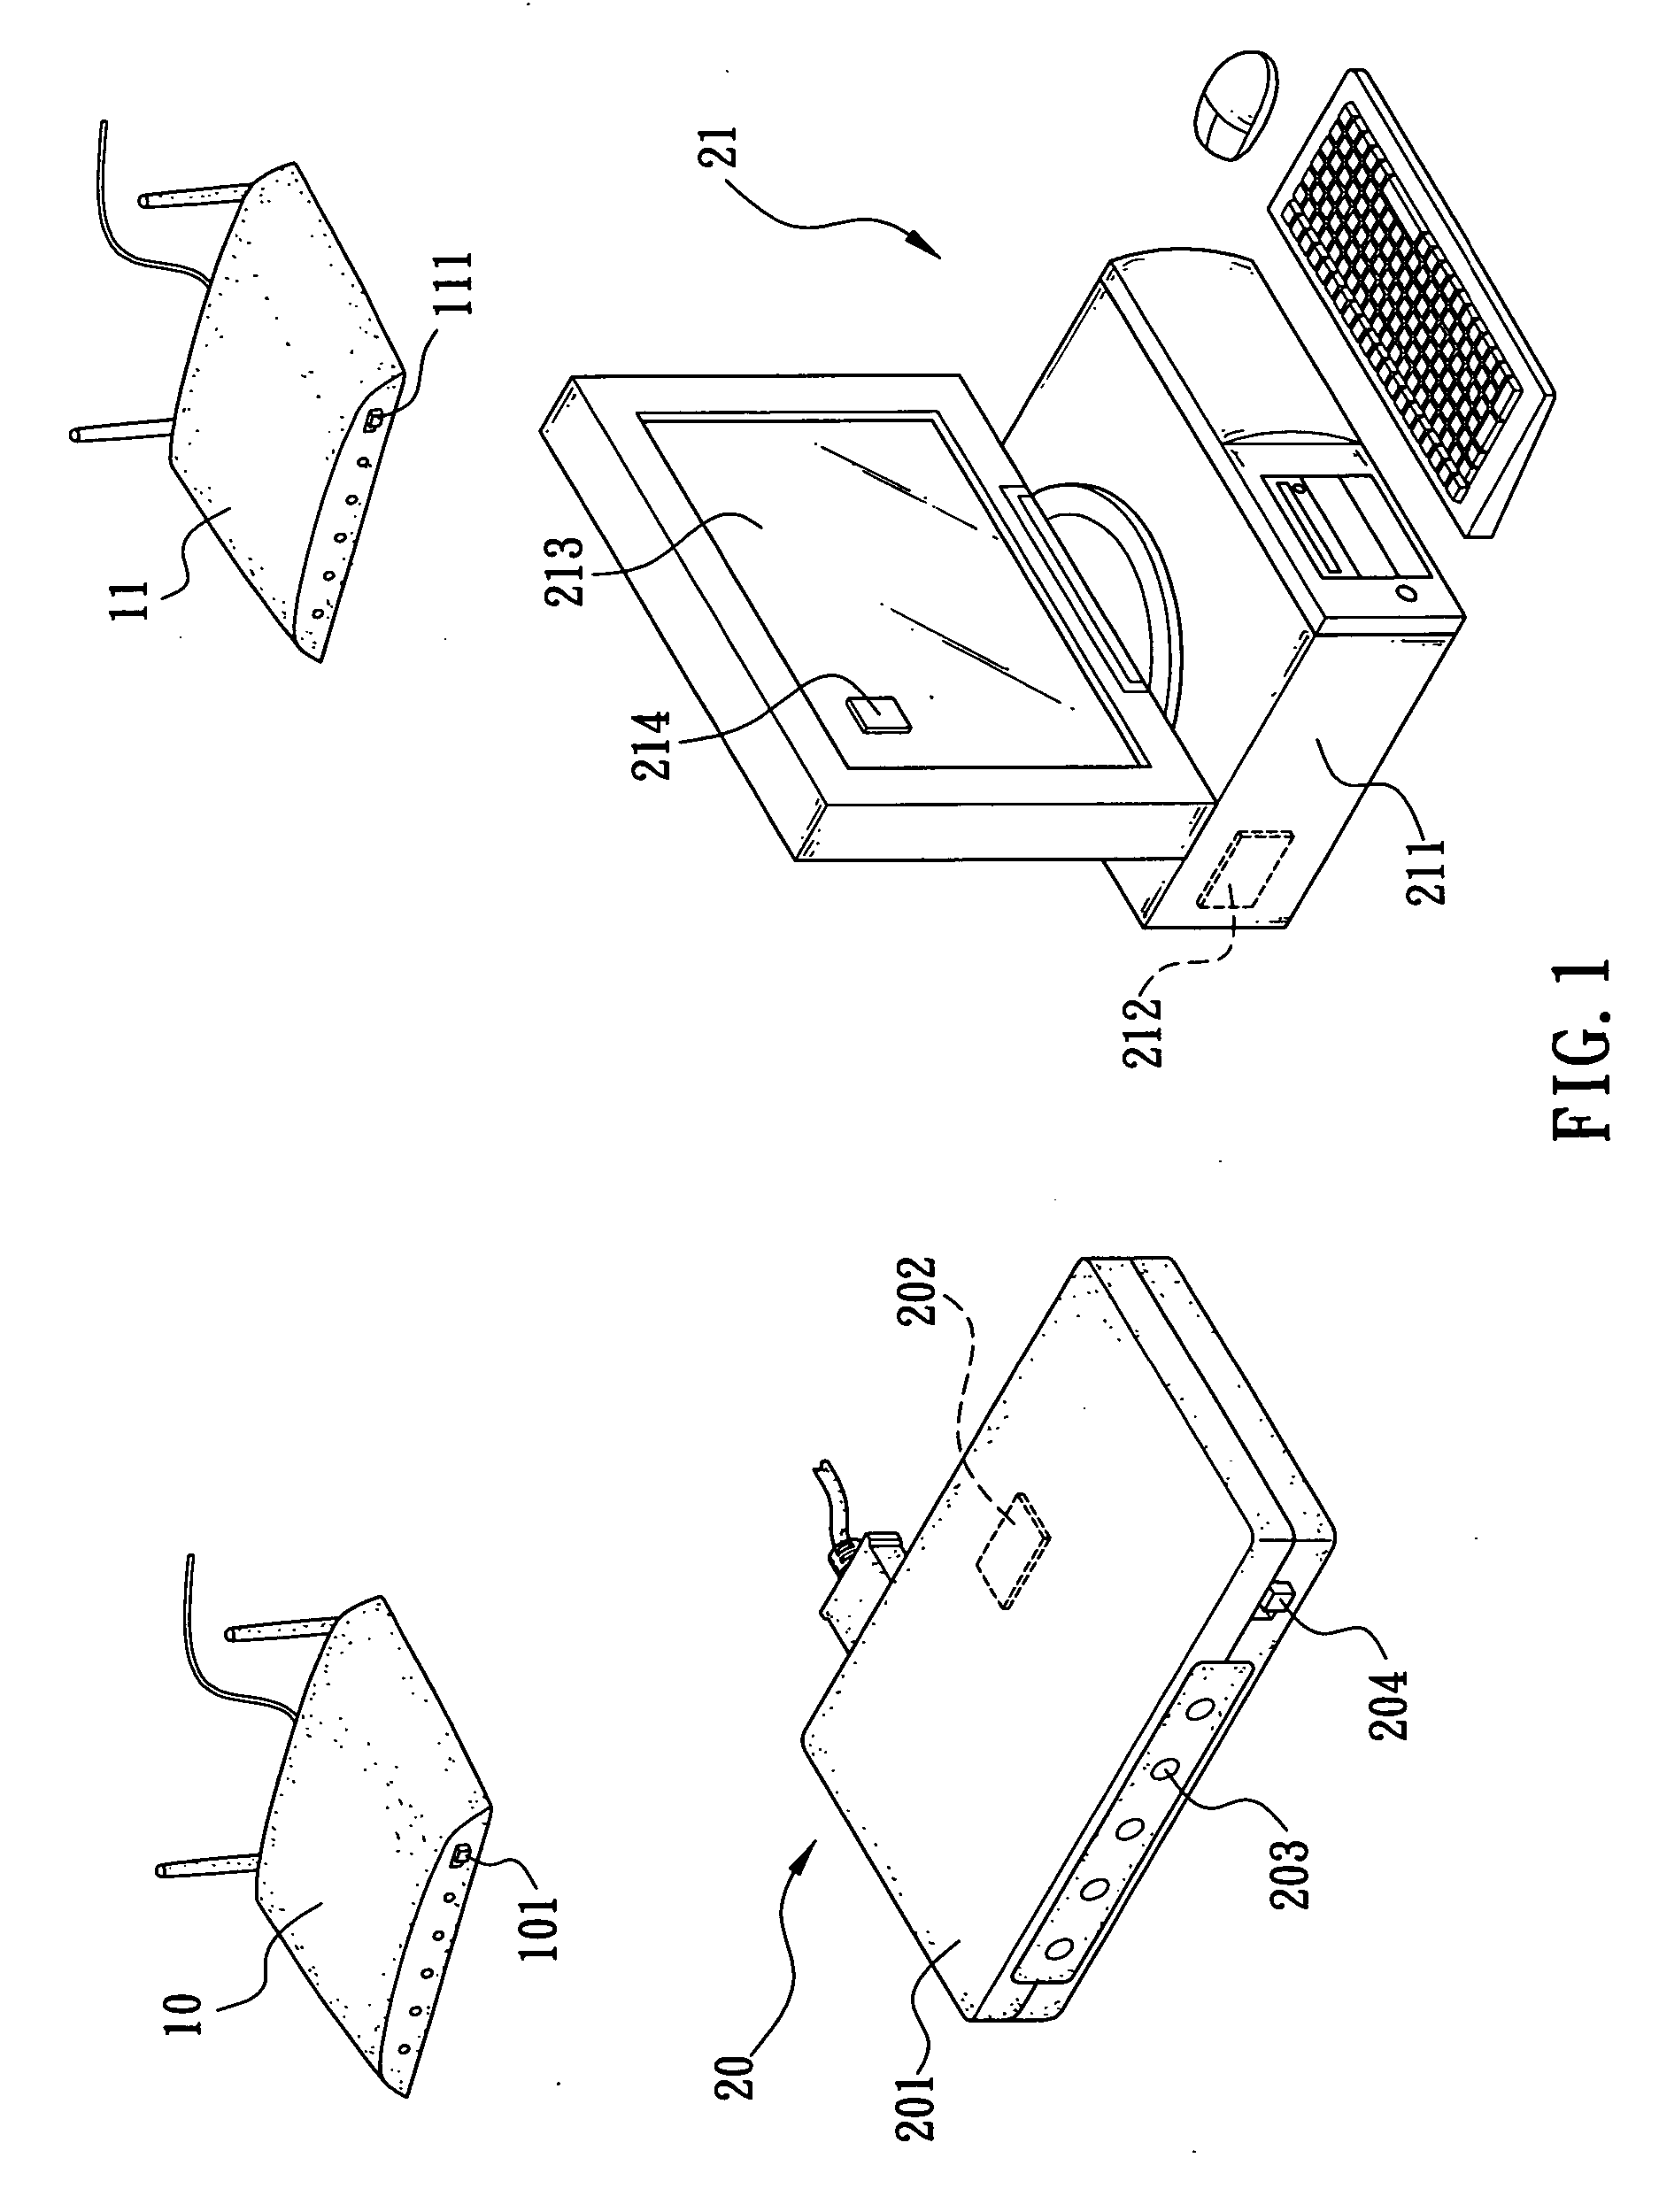 Secure connection mechanism capable of automatically negotiating password between wireless client terminal and wireless access terminal